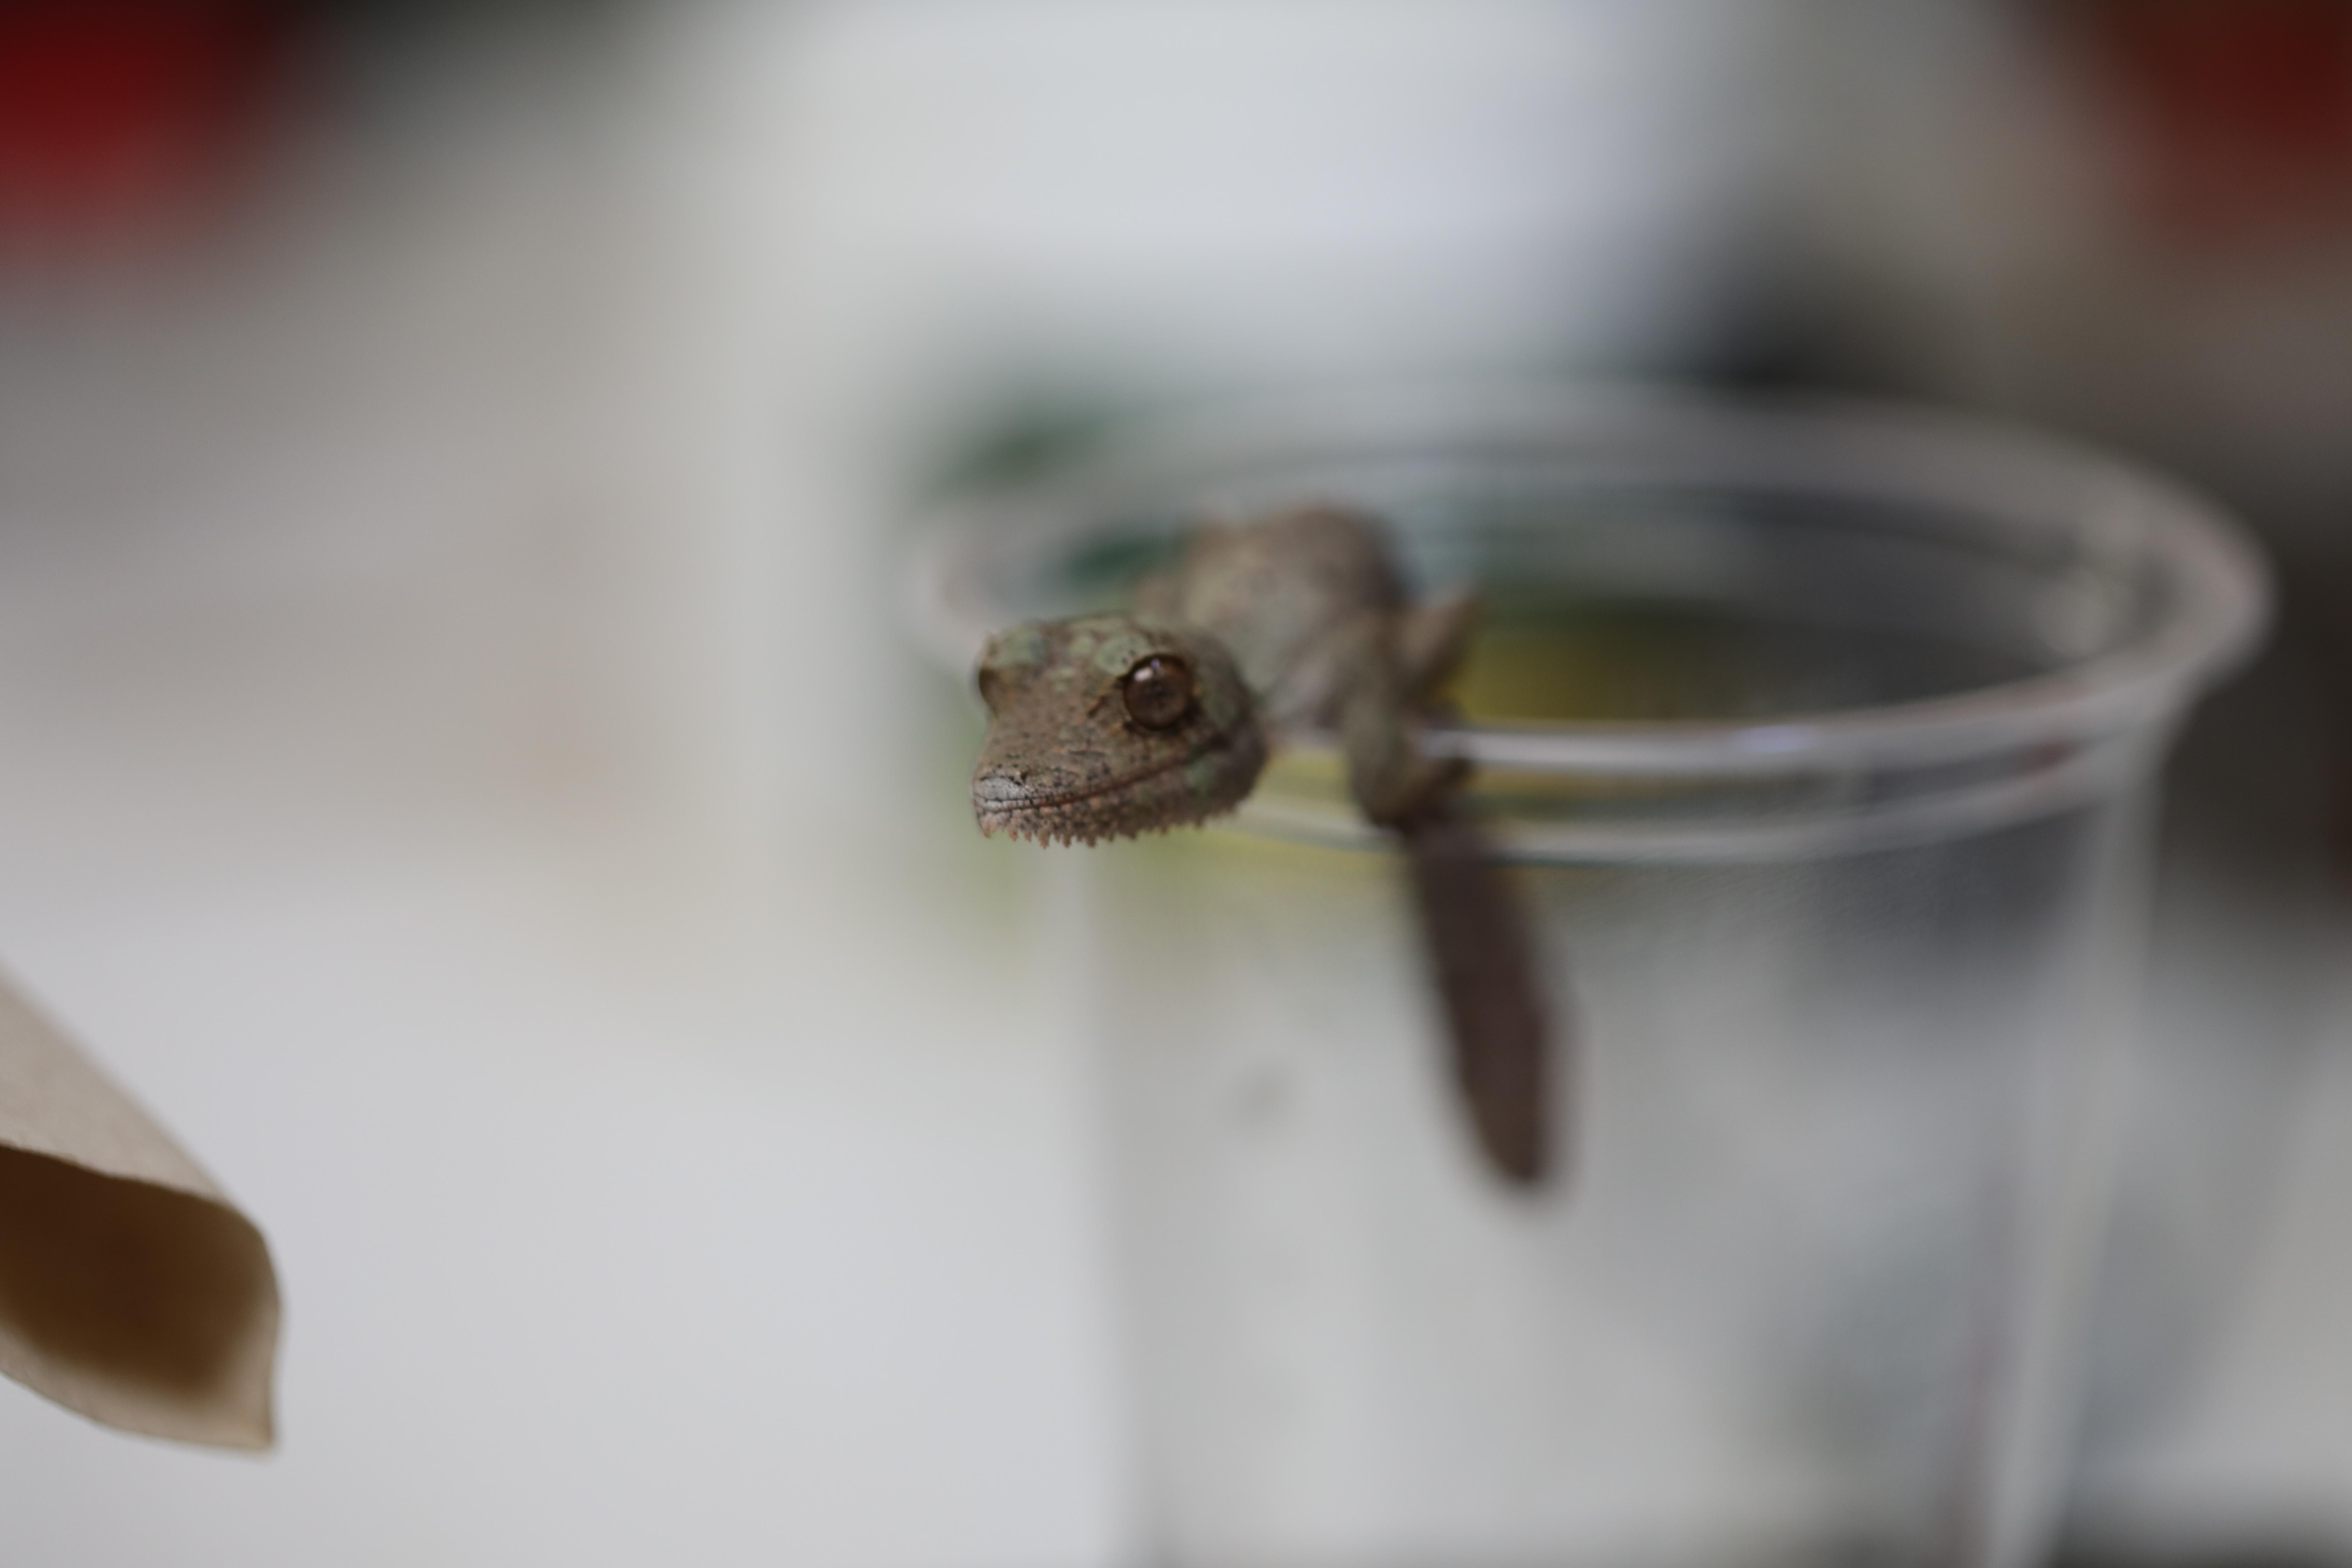 Close up image, Henkels leaf tailed gecko hatchling sitting on edge of plastic cup as it is being weighed

Image: AMY MIDDLETON 2023